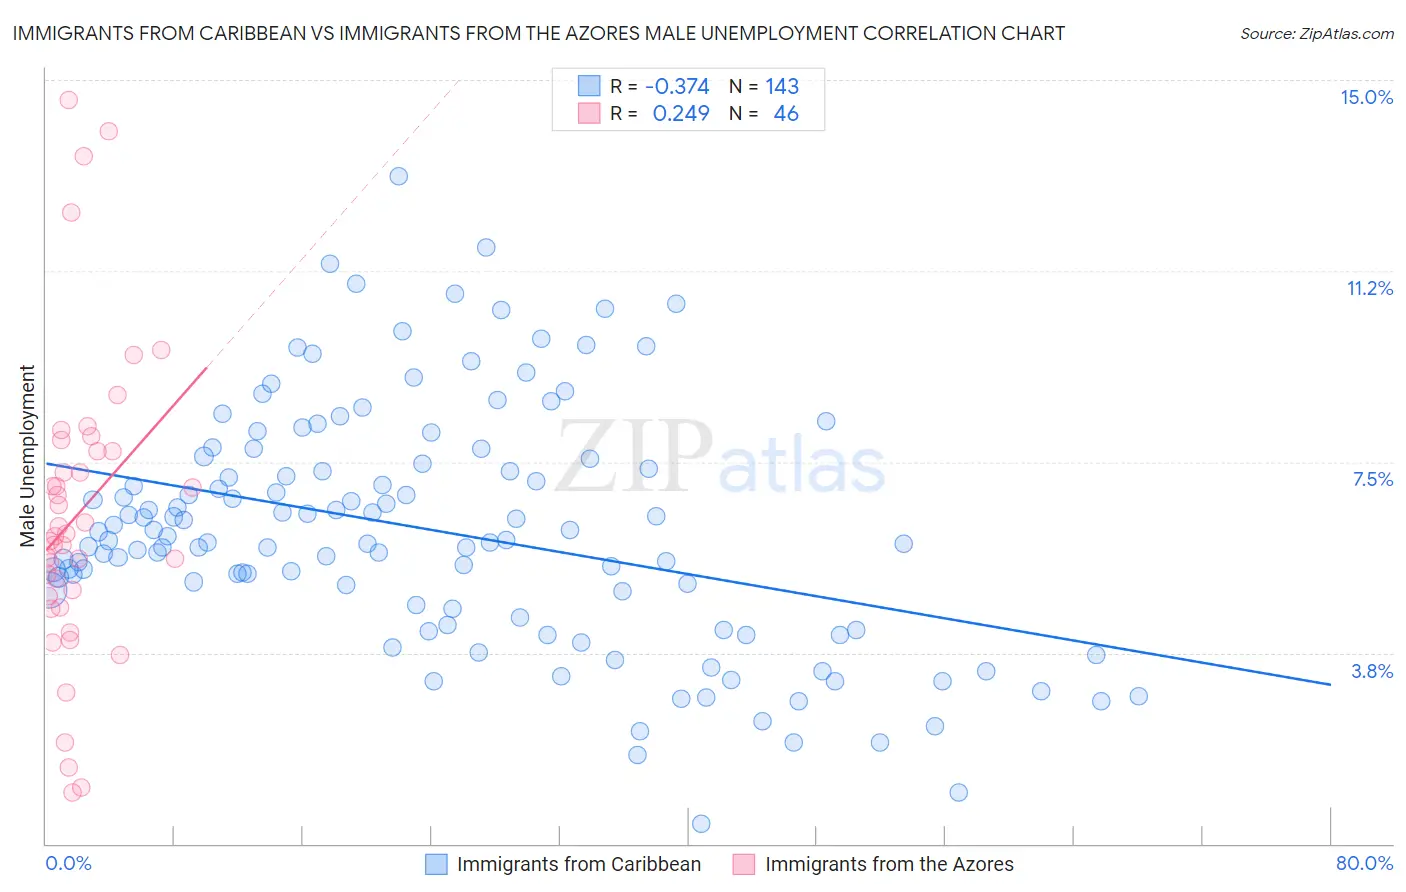 Immigrants from Caribbean vs Immigrants from the Azores Male Unemployment